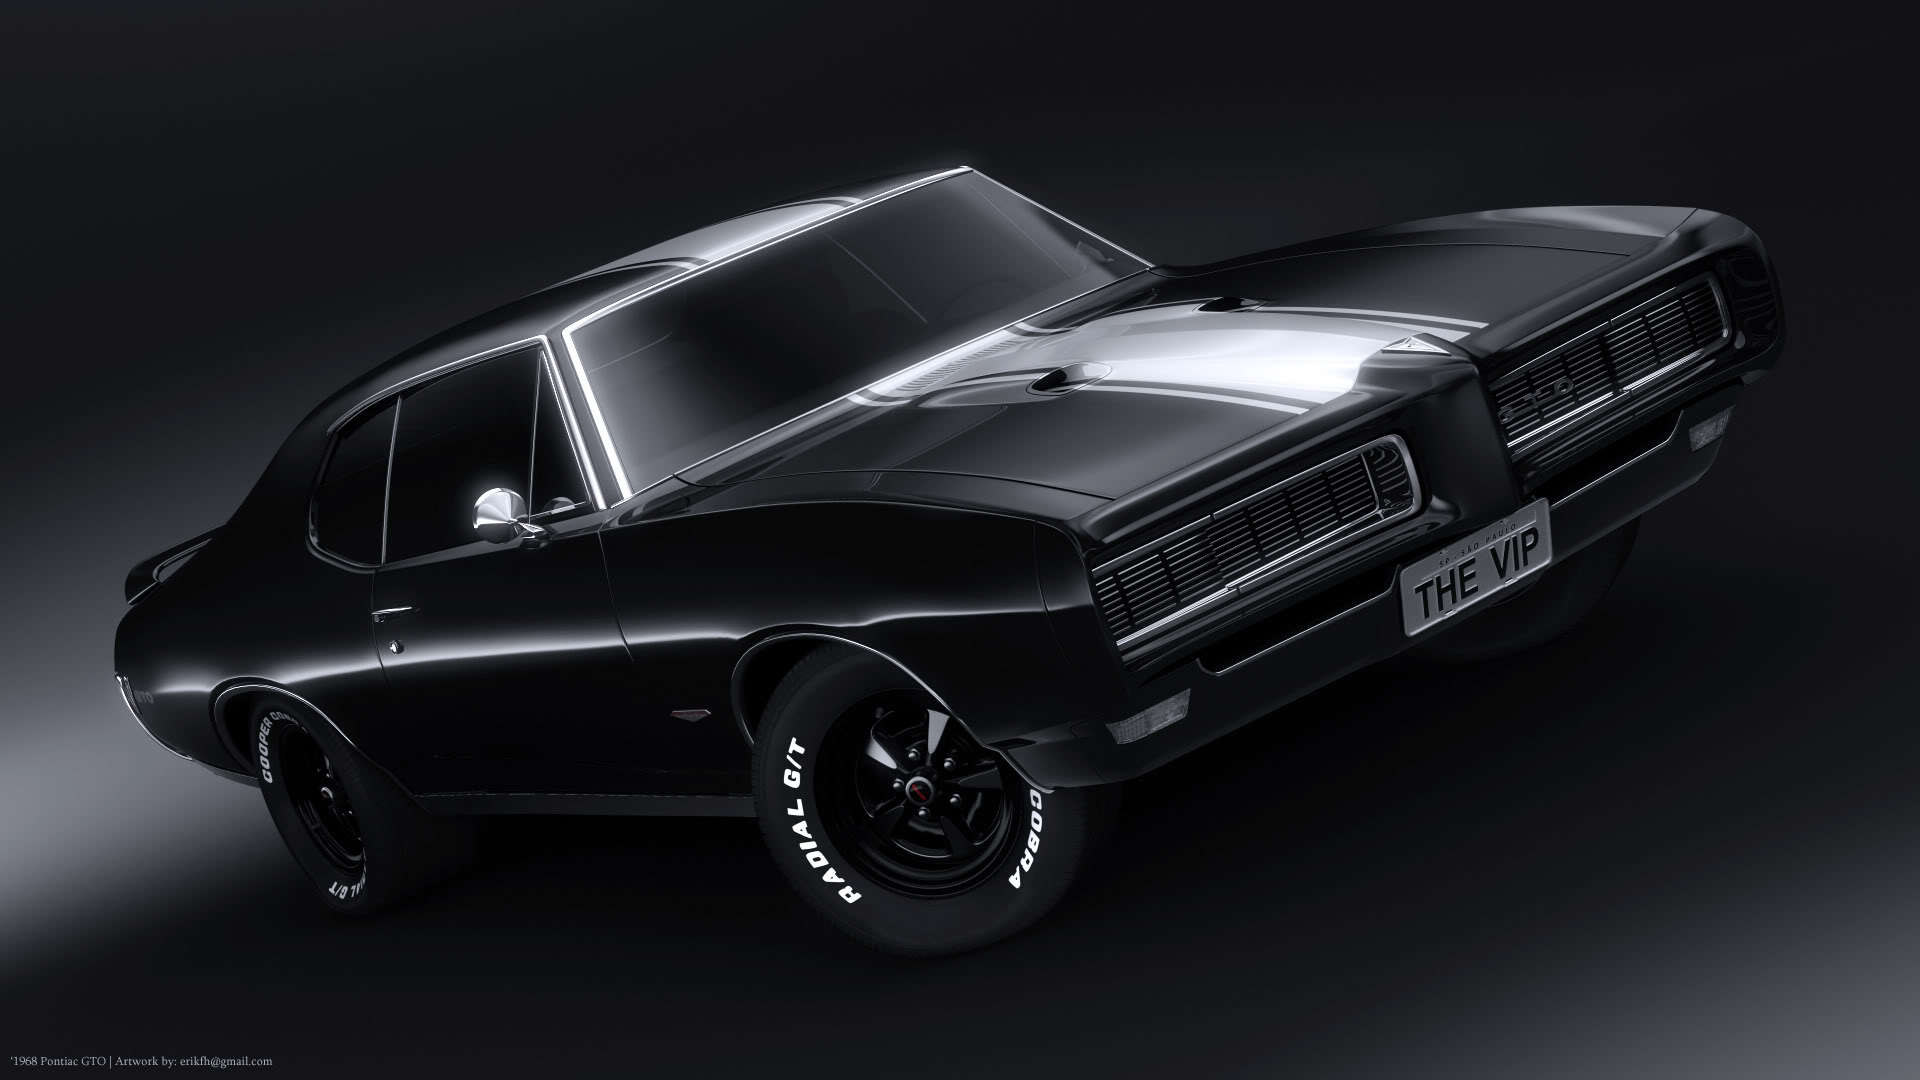 New car Pontiac GTO wallpapers and images - wallpapers, pictures, photos